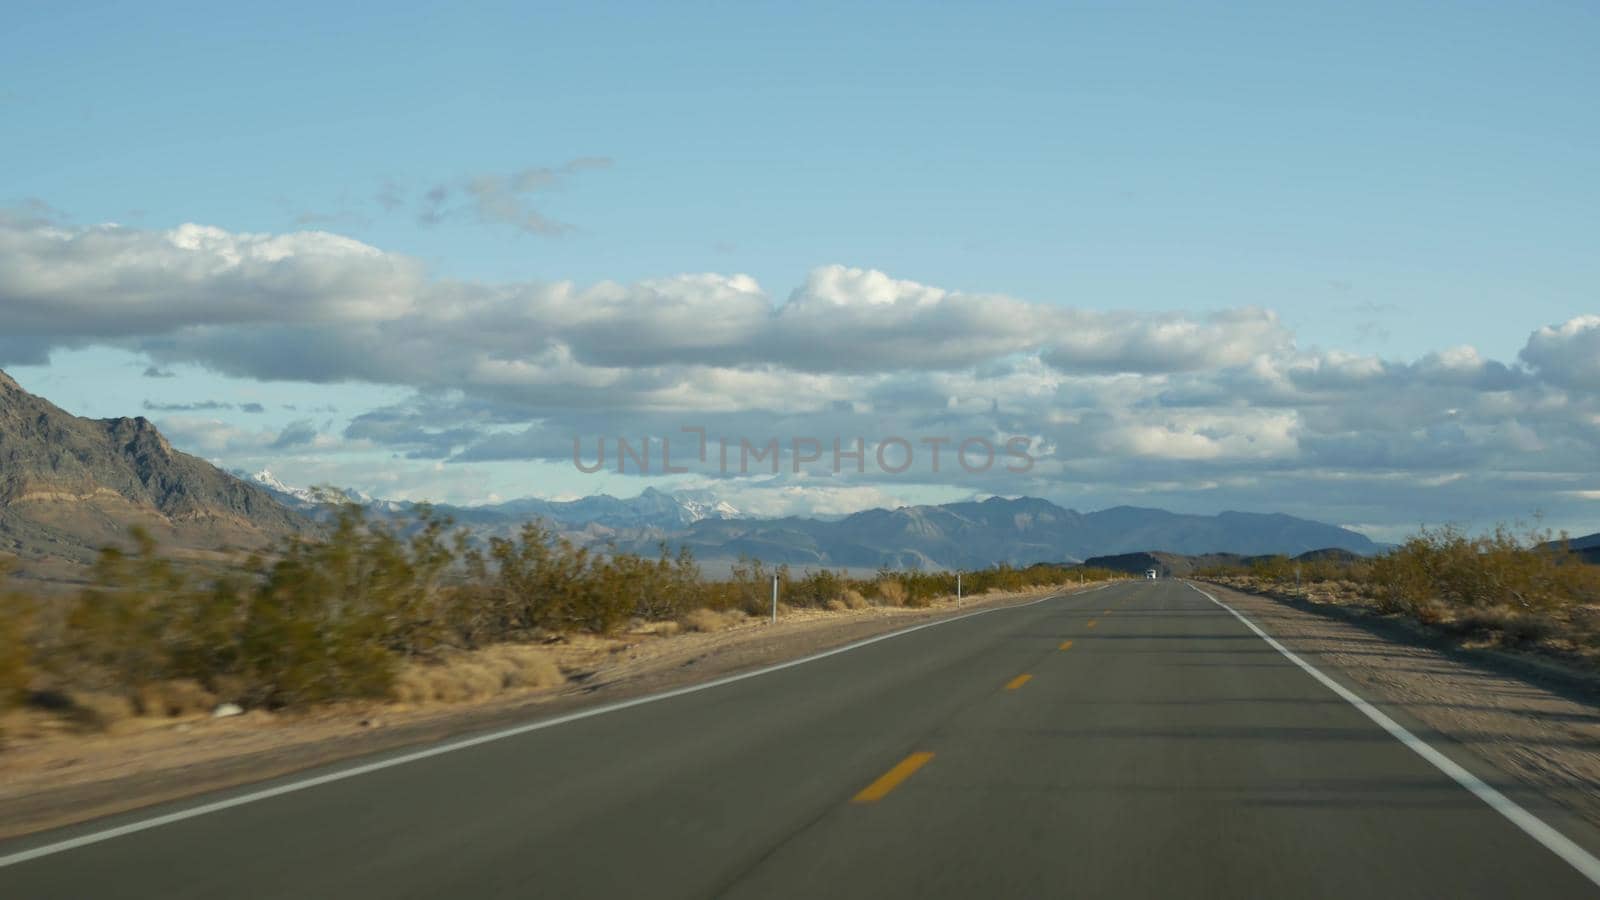 Road trip, driving auto from Death Valley to Las Vegas, Nevada USA. Hitchhiking traveling in America. Highway journey, dramatic atmosphere, cloud, mountain and Mojave desert wilderness. View from car by DogoraSun